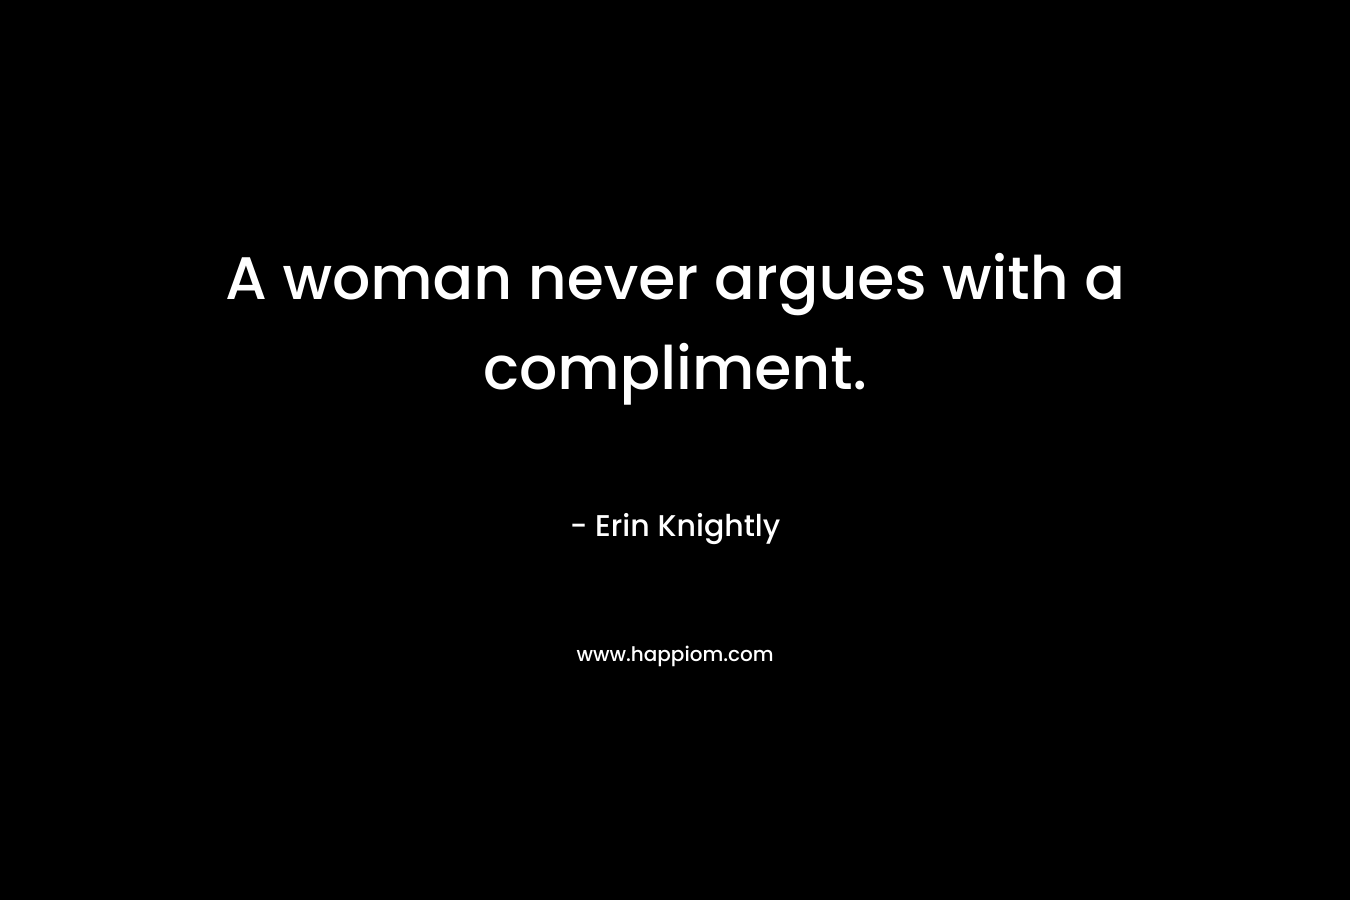 A woman never argues with a compliment. – Erin Knightly